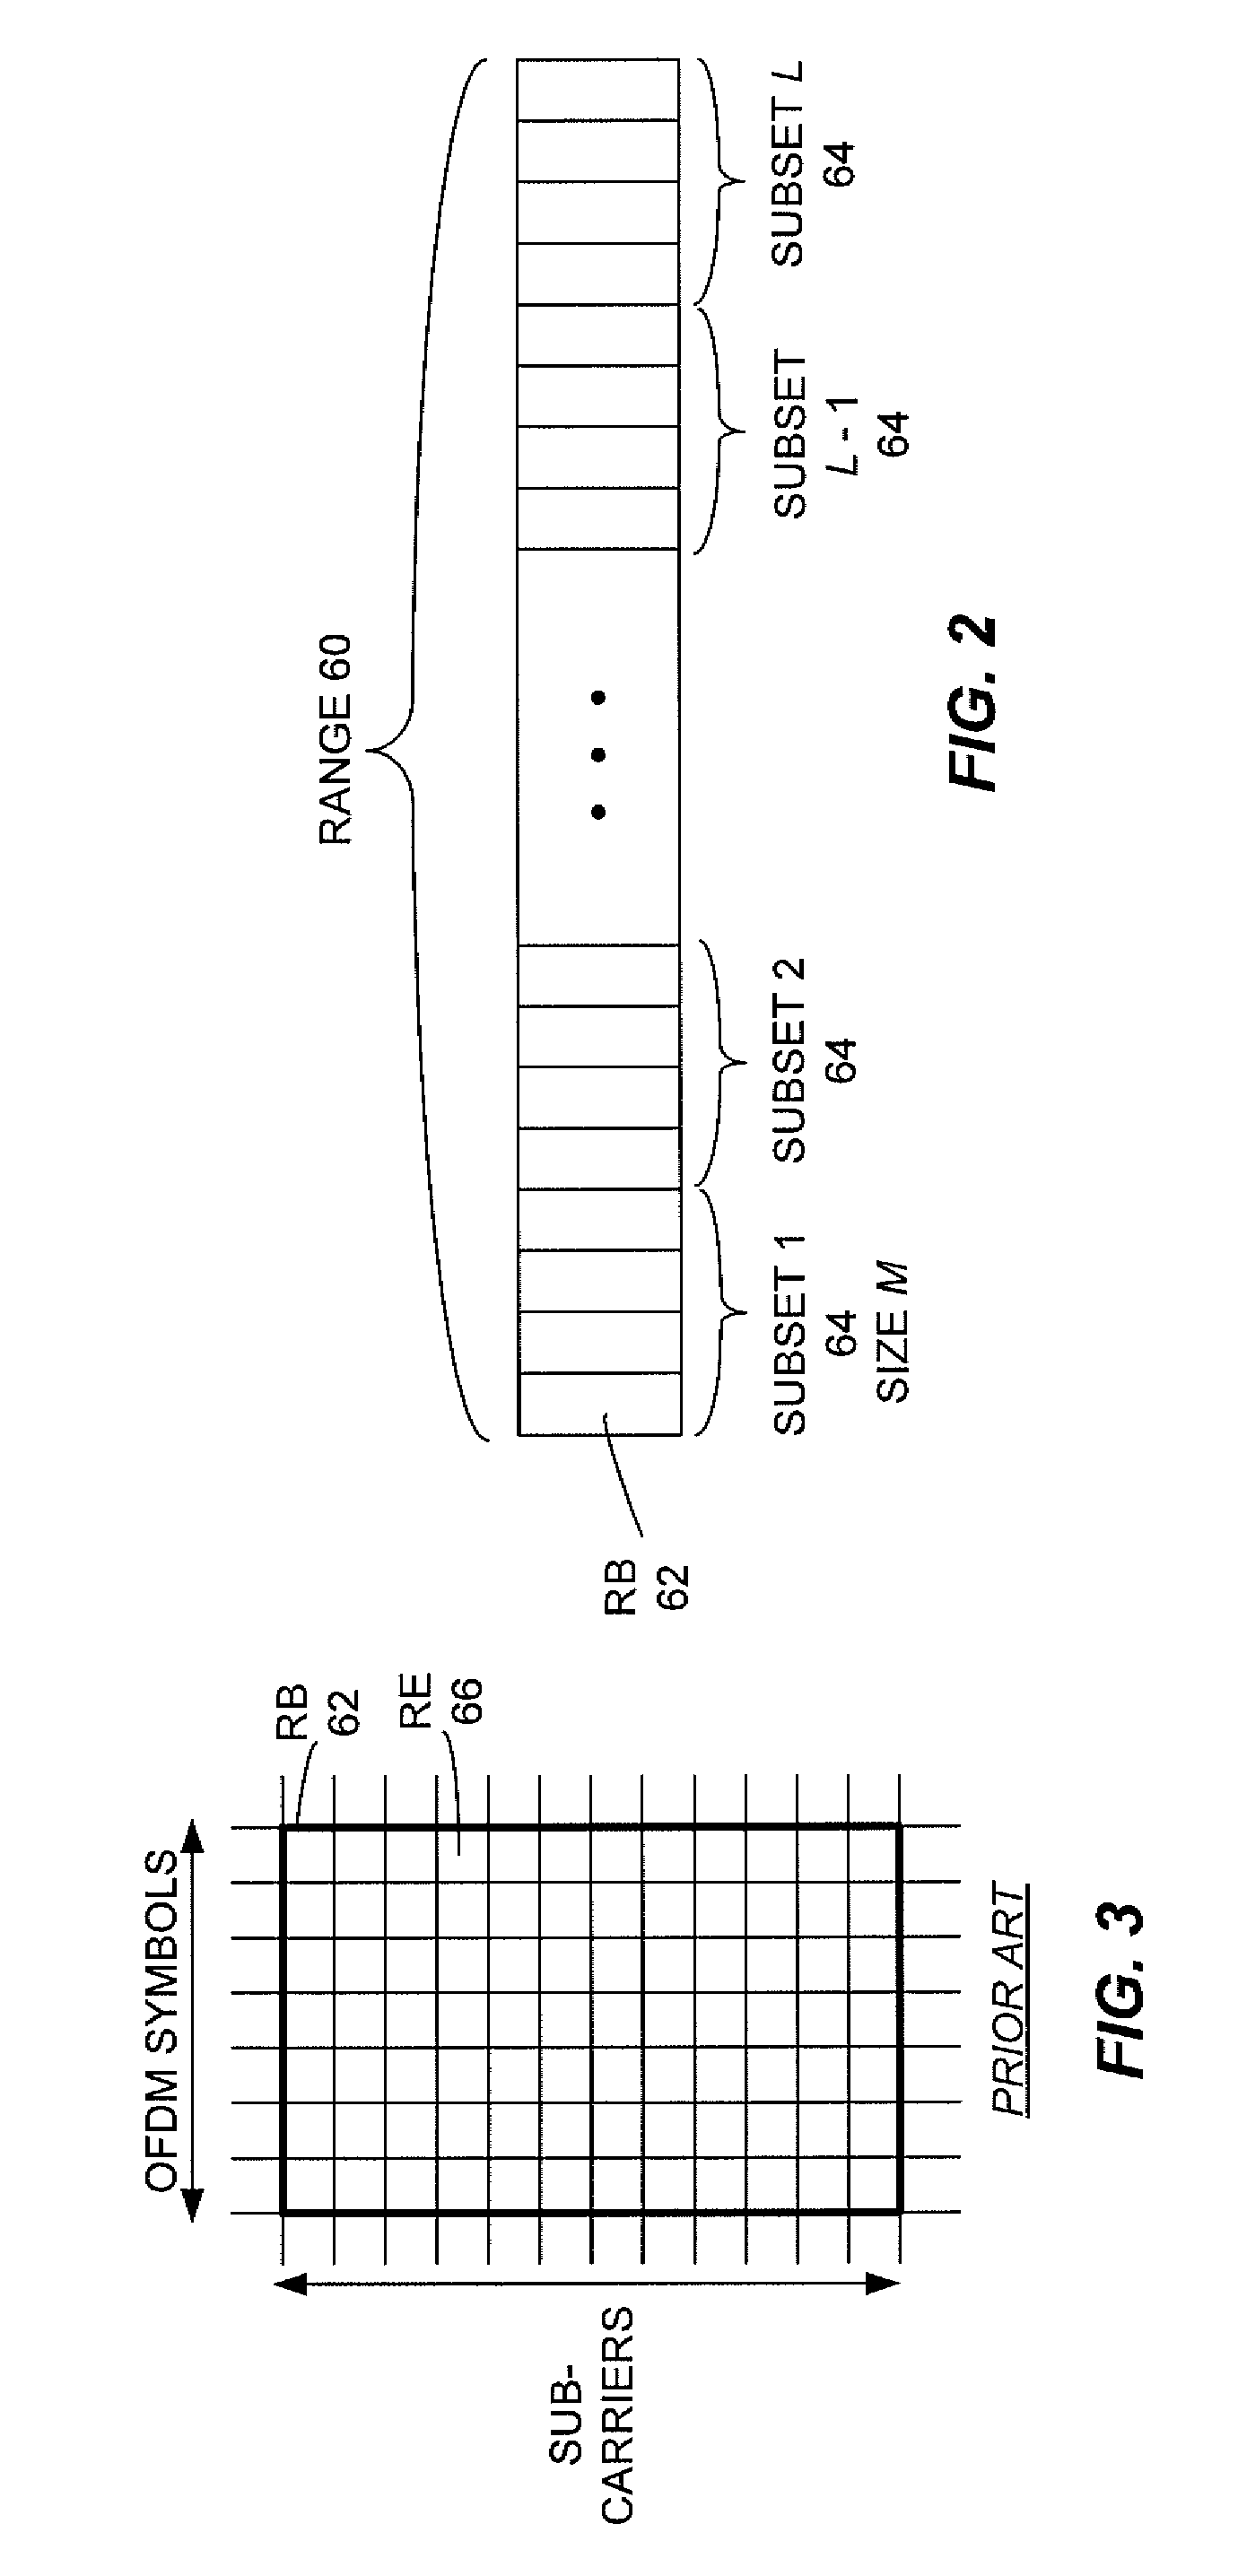 Method and Apparatus for Contention-Based Granting in a Wireless Communication Network